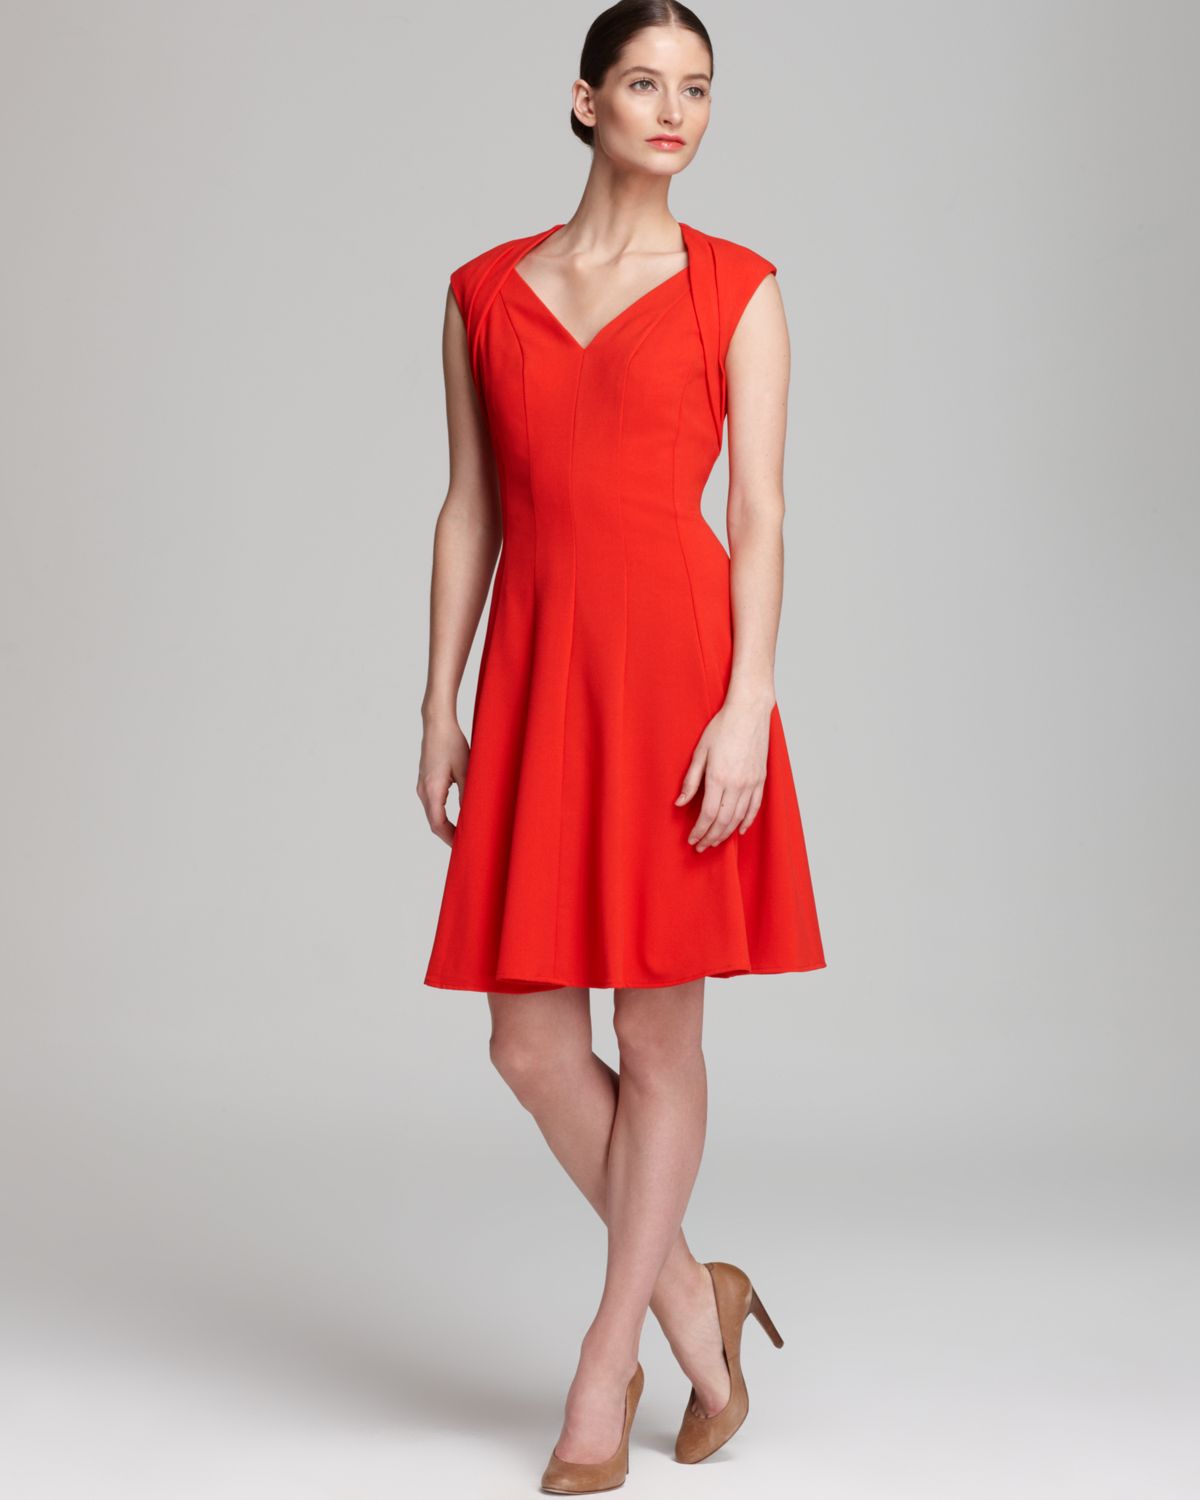 Lyst - Calvin Klein Dress Cap Sleeve Fit Flare in Red